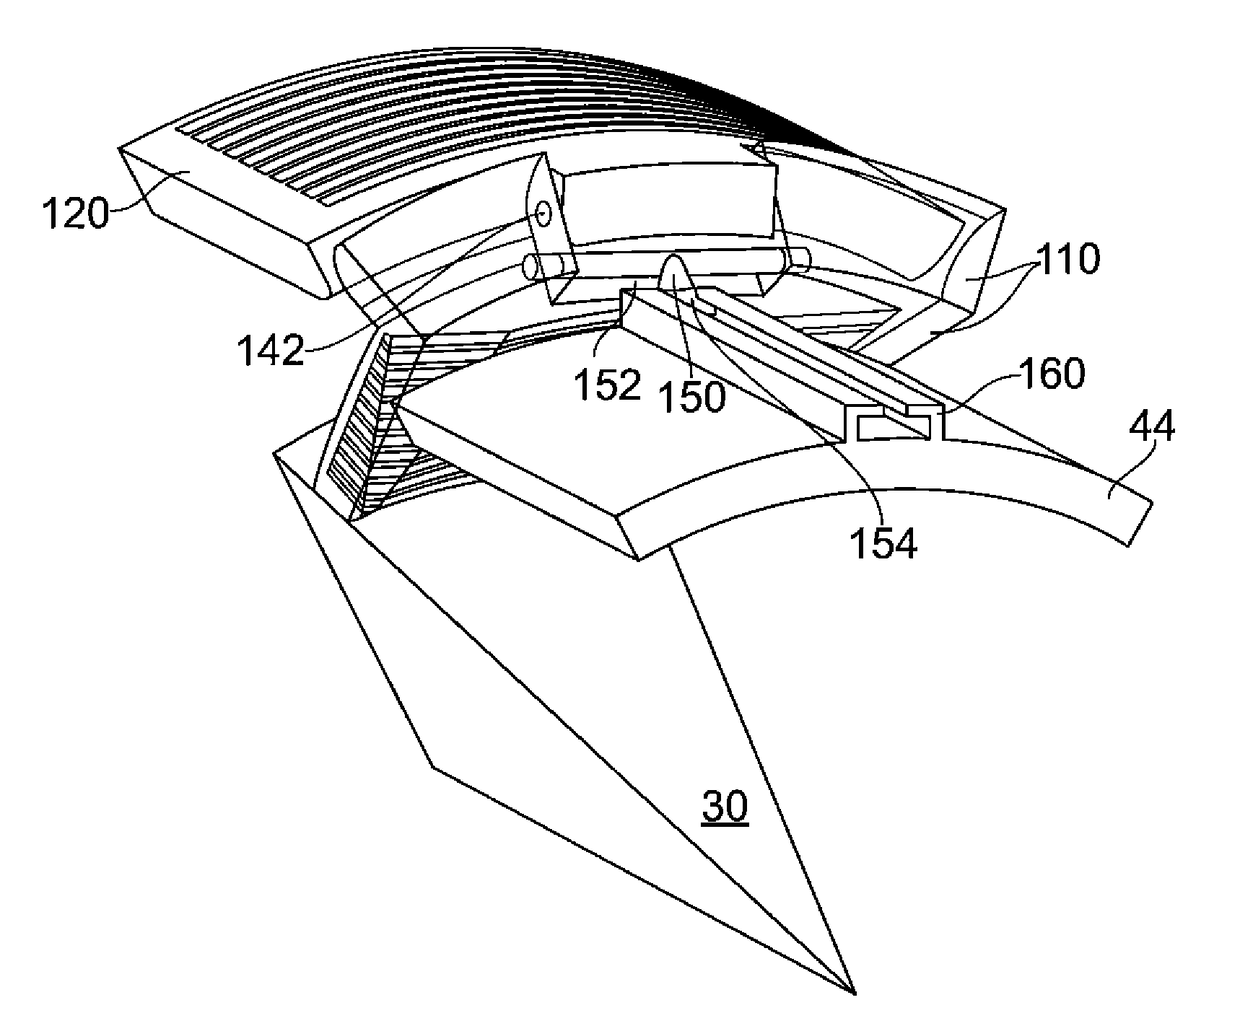 Thrust reverser unit having both nested cascades translating linearly and only one cascade rotational